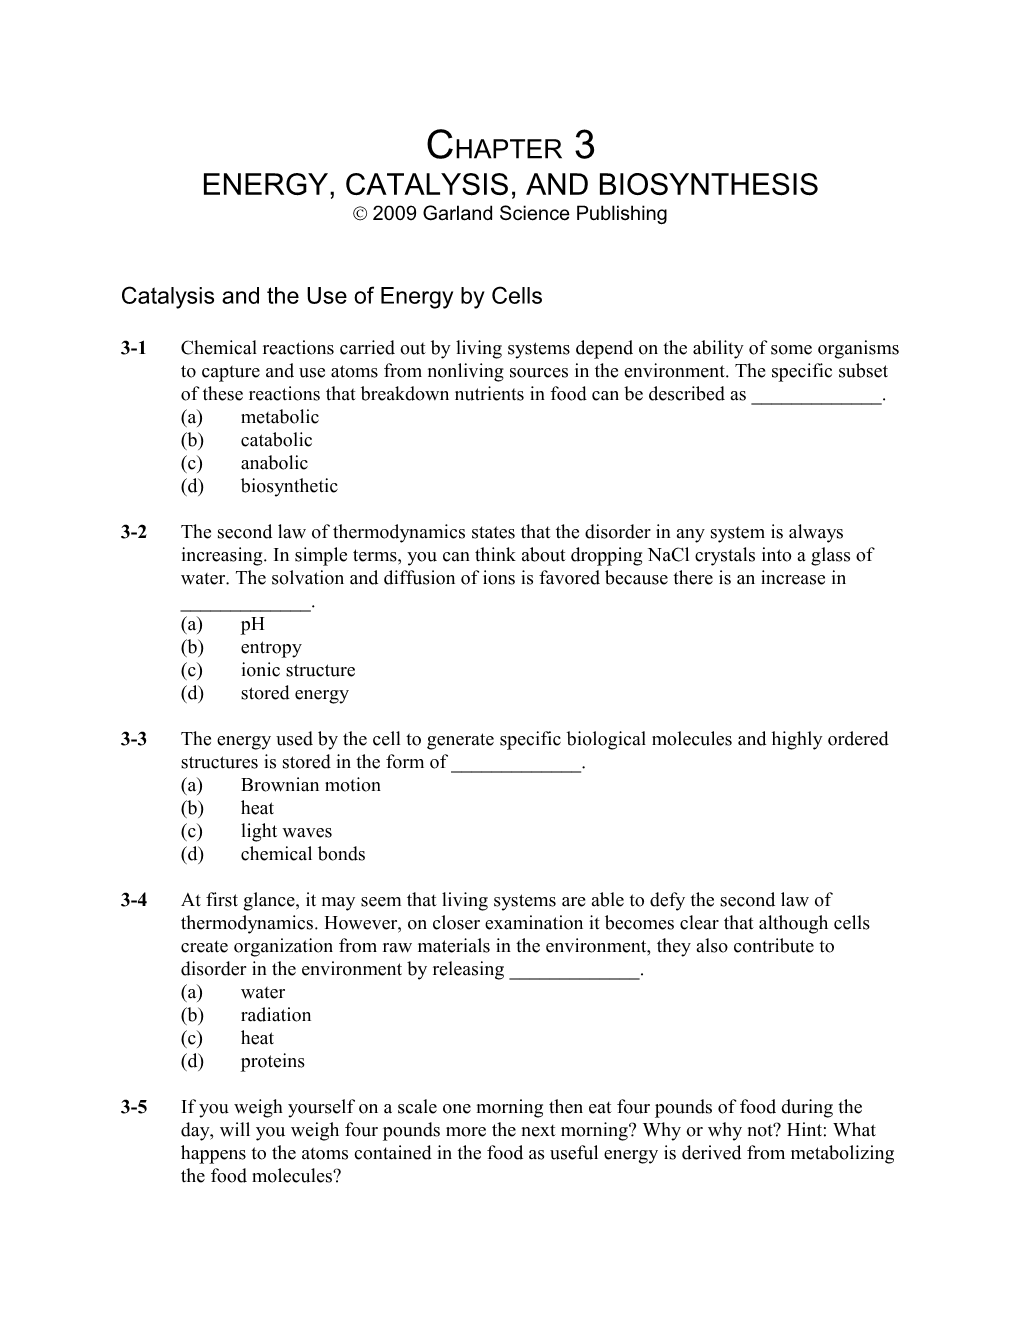 Chapter 3: Energy, Catalysis, and Biosynthesis